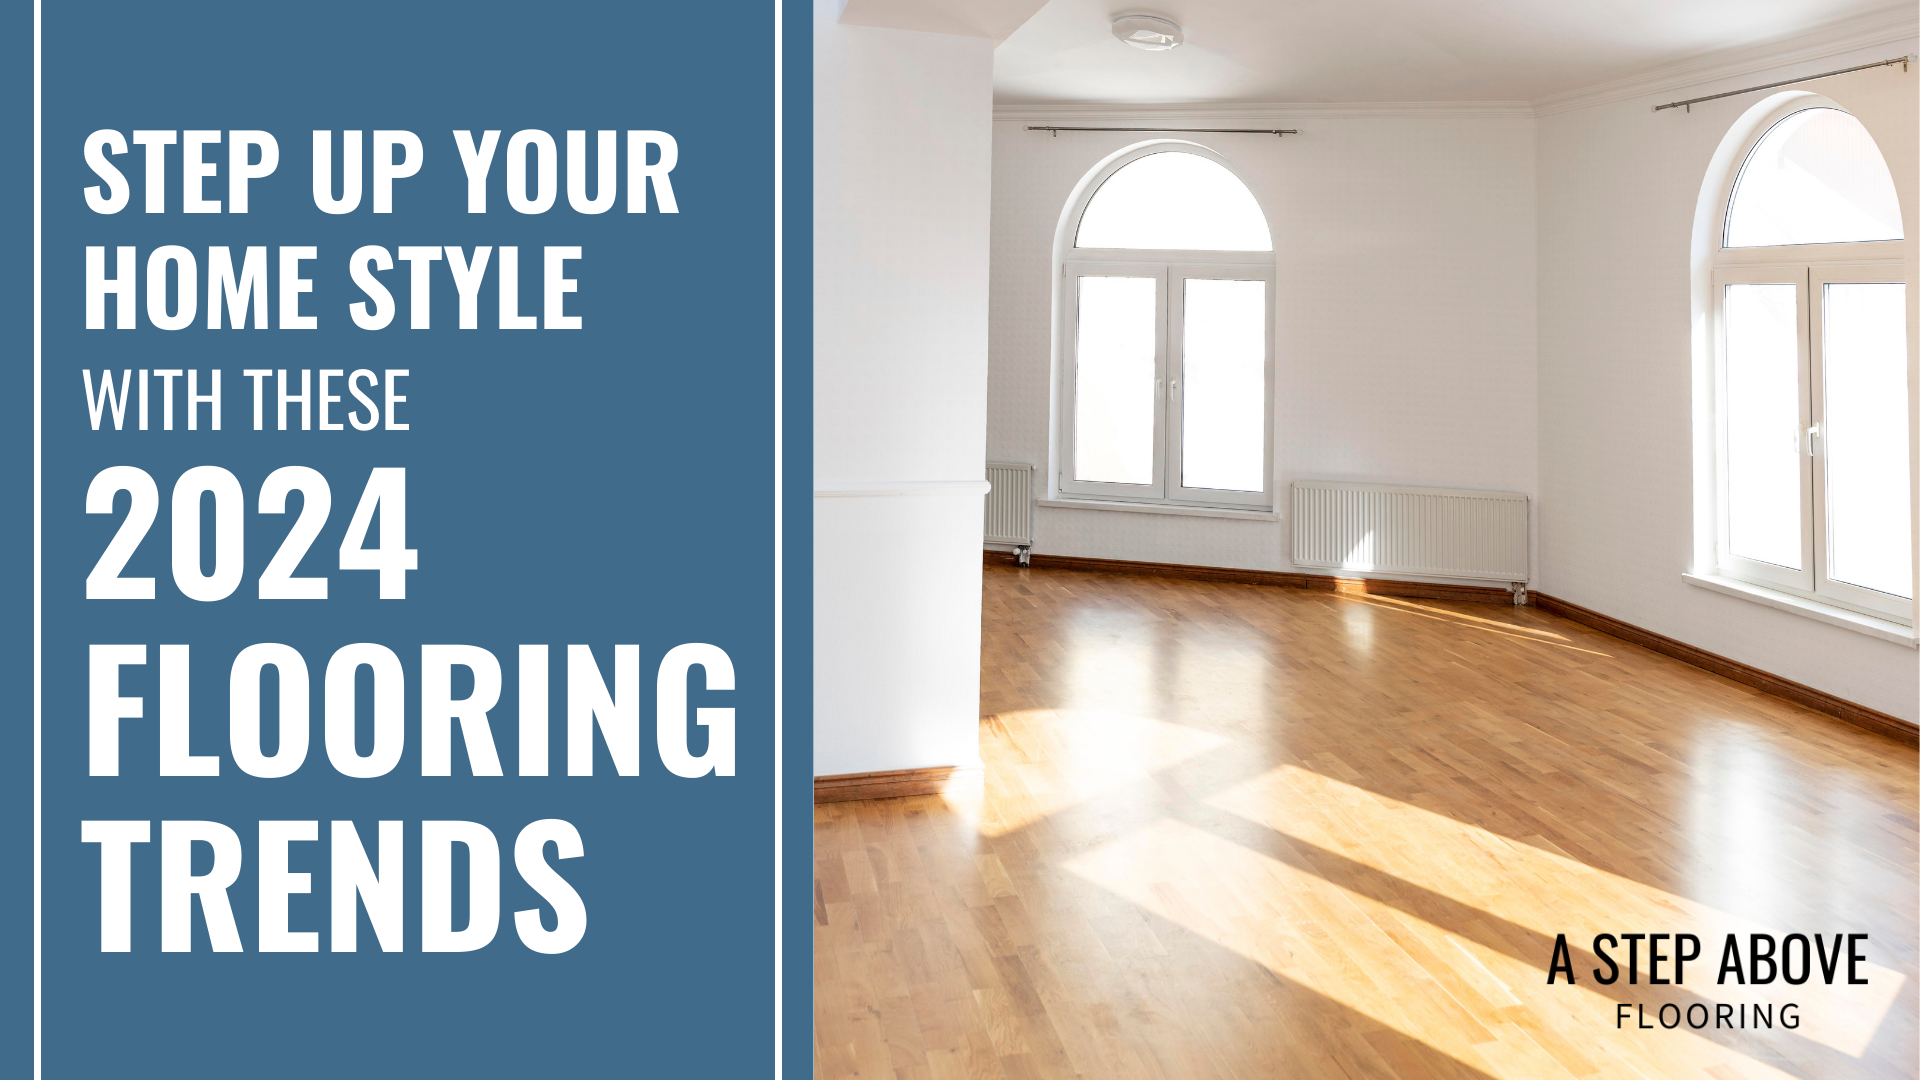 Step Up Your Home Style with These 2024 Flooring Trends 